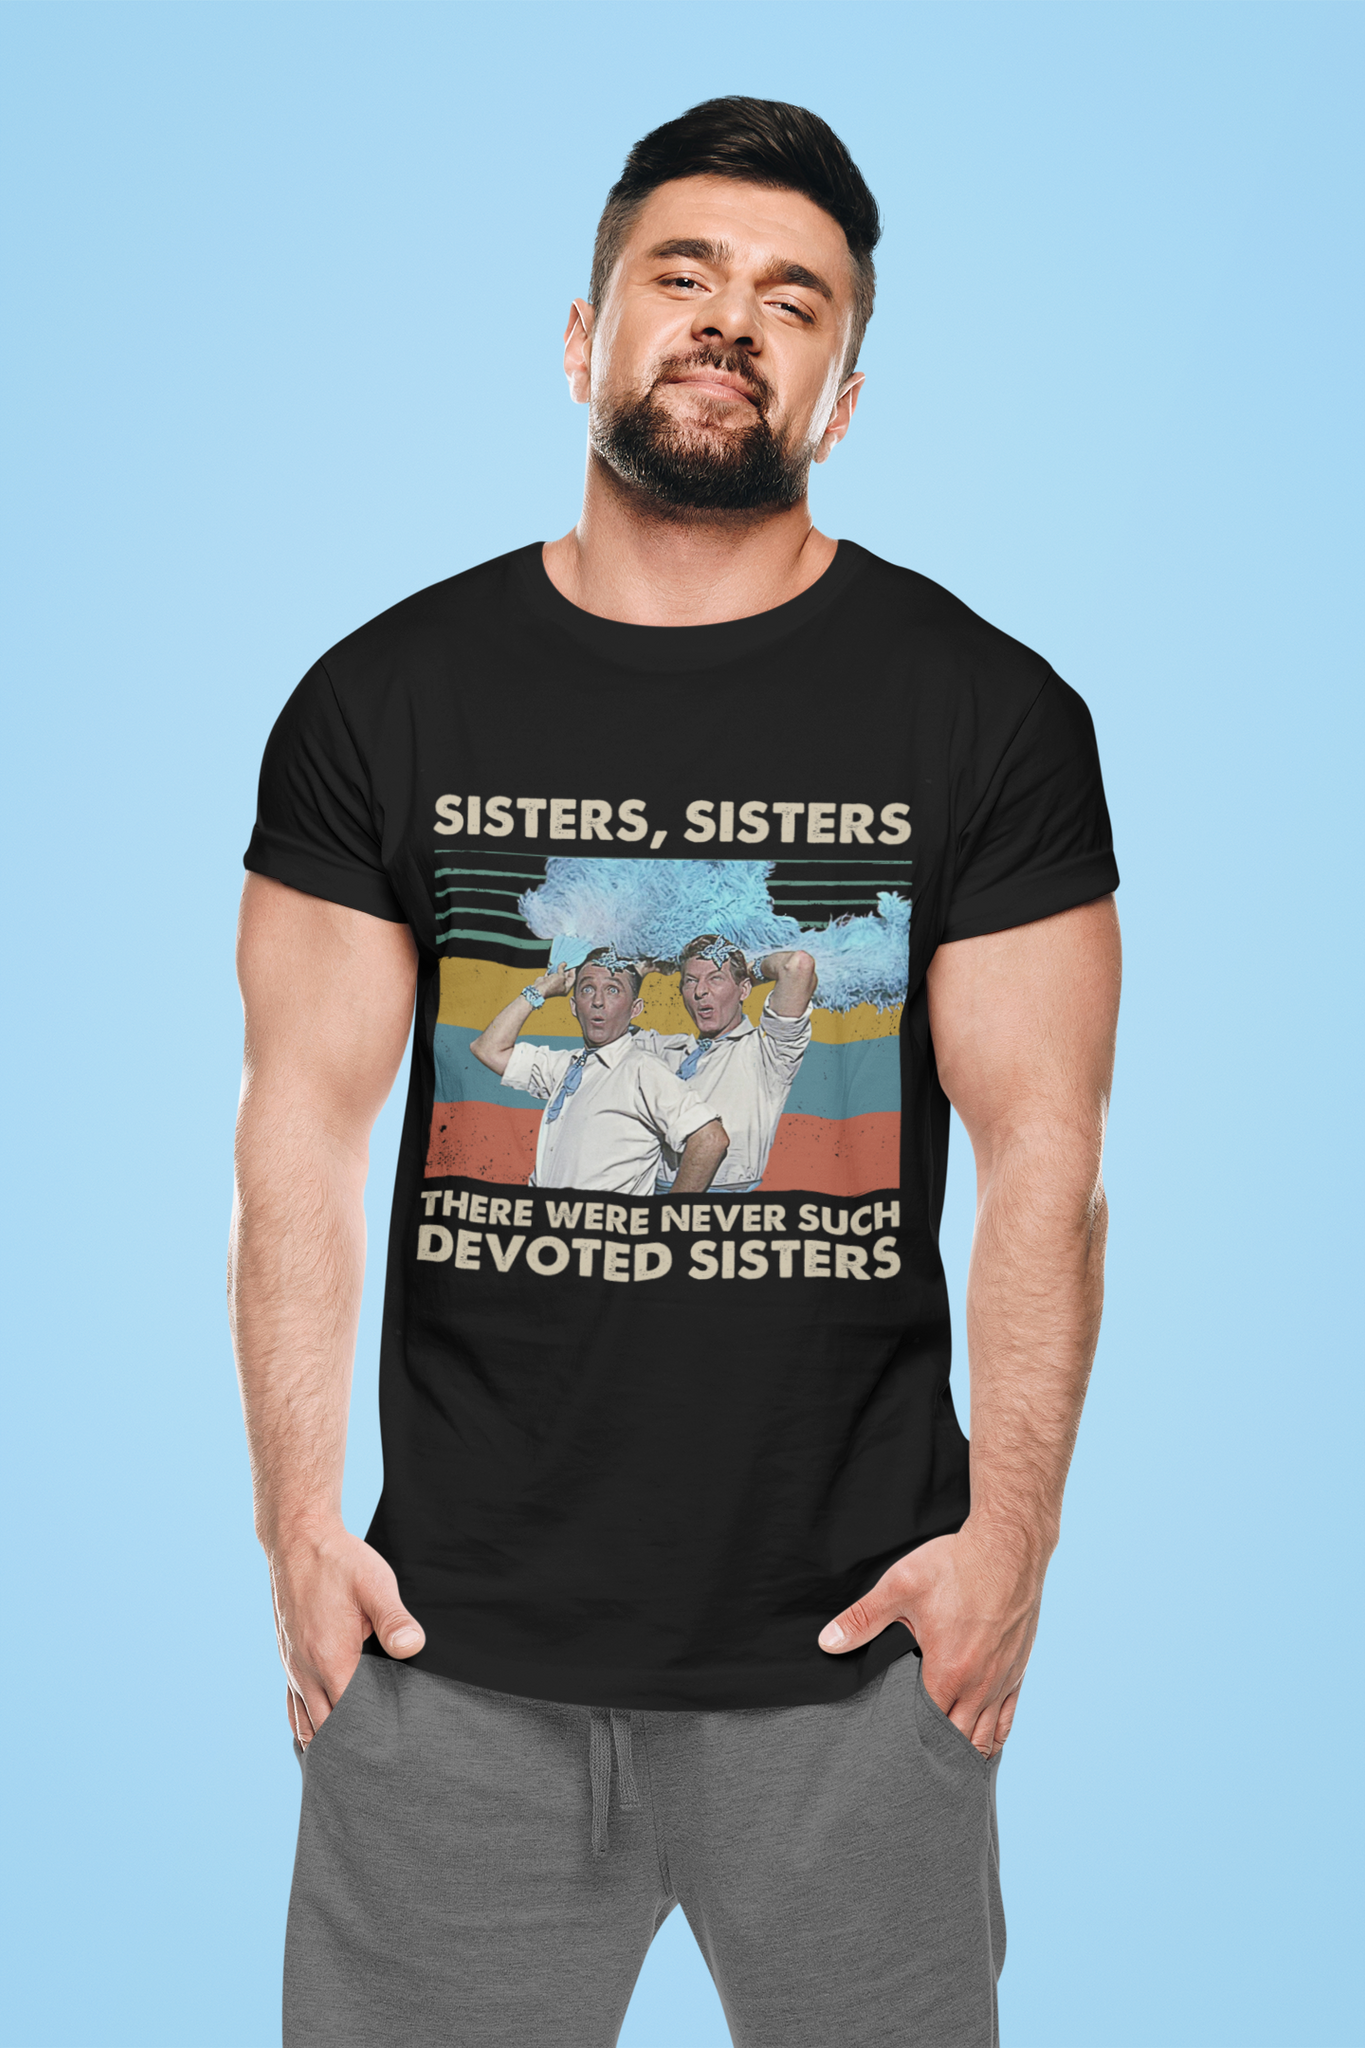 White Christmas Vintage T Shirt, Bob Wallace Phil Davis Tshirt, Sister Sister There Were Never Such Devoted Sisters Shirt, Christmas Gifts